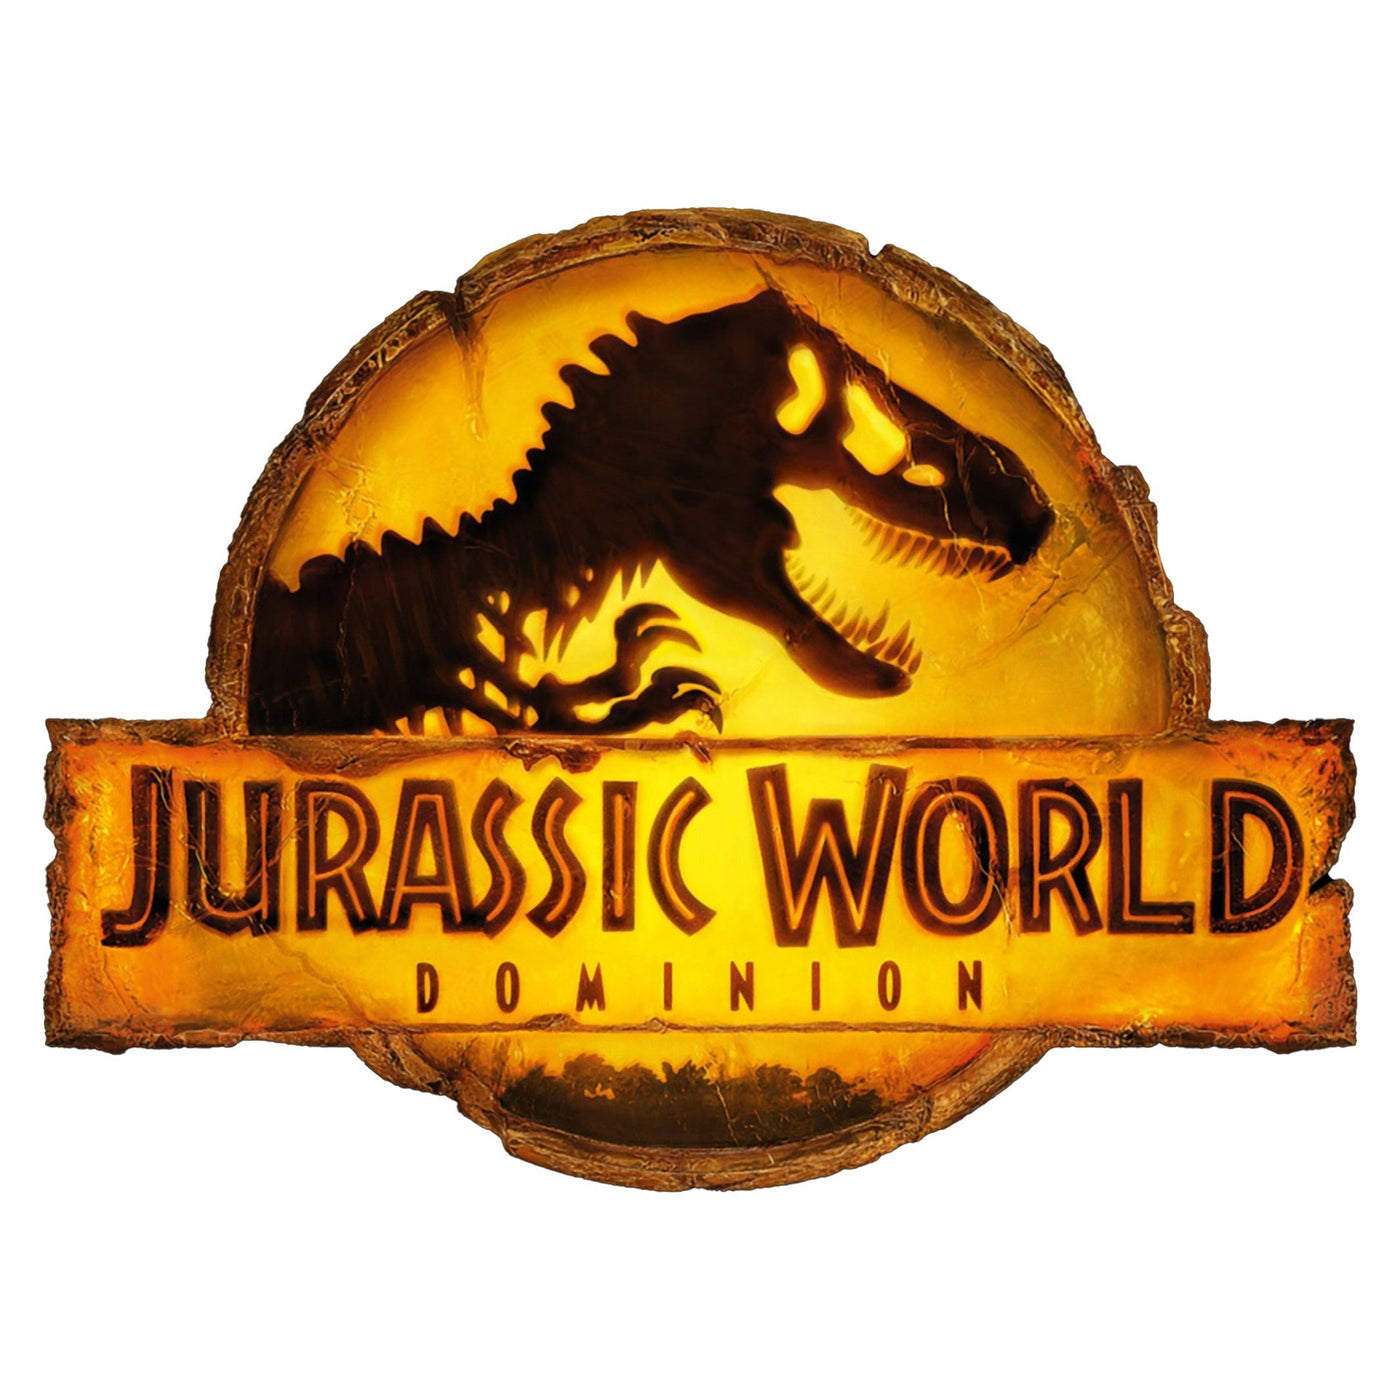 Jurassic World Dominion - Restricted Access 3x 49 piece Jigsaw Puzzles